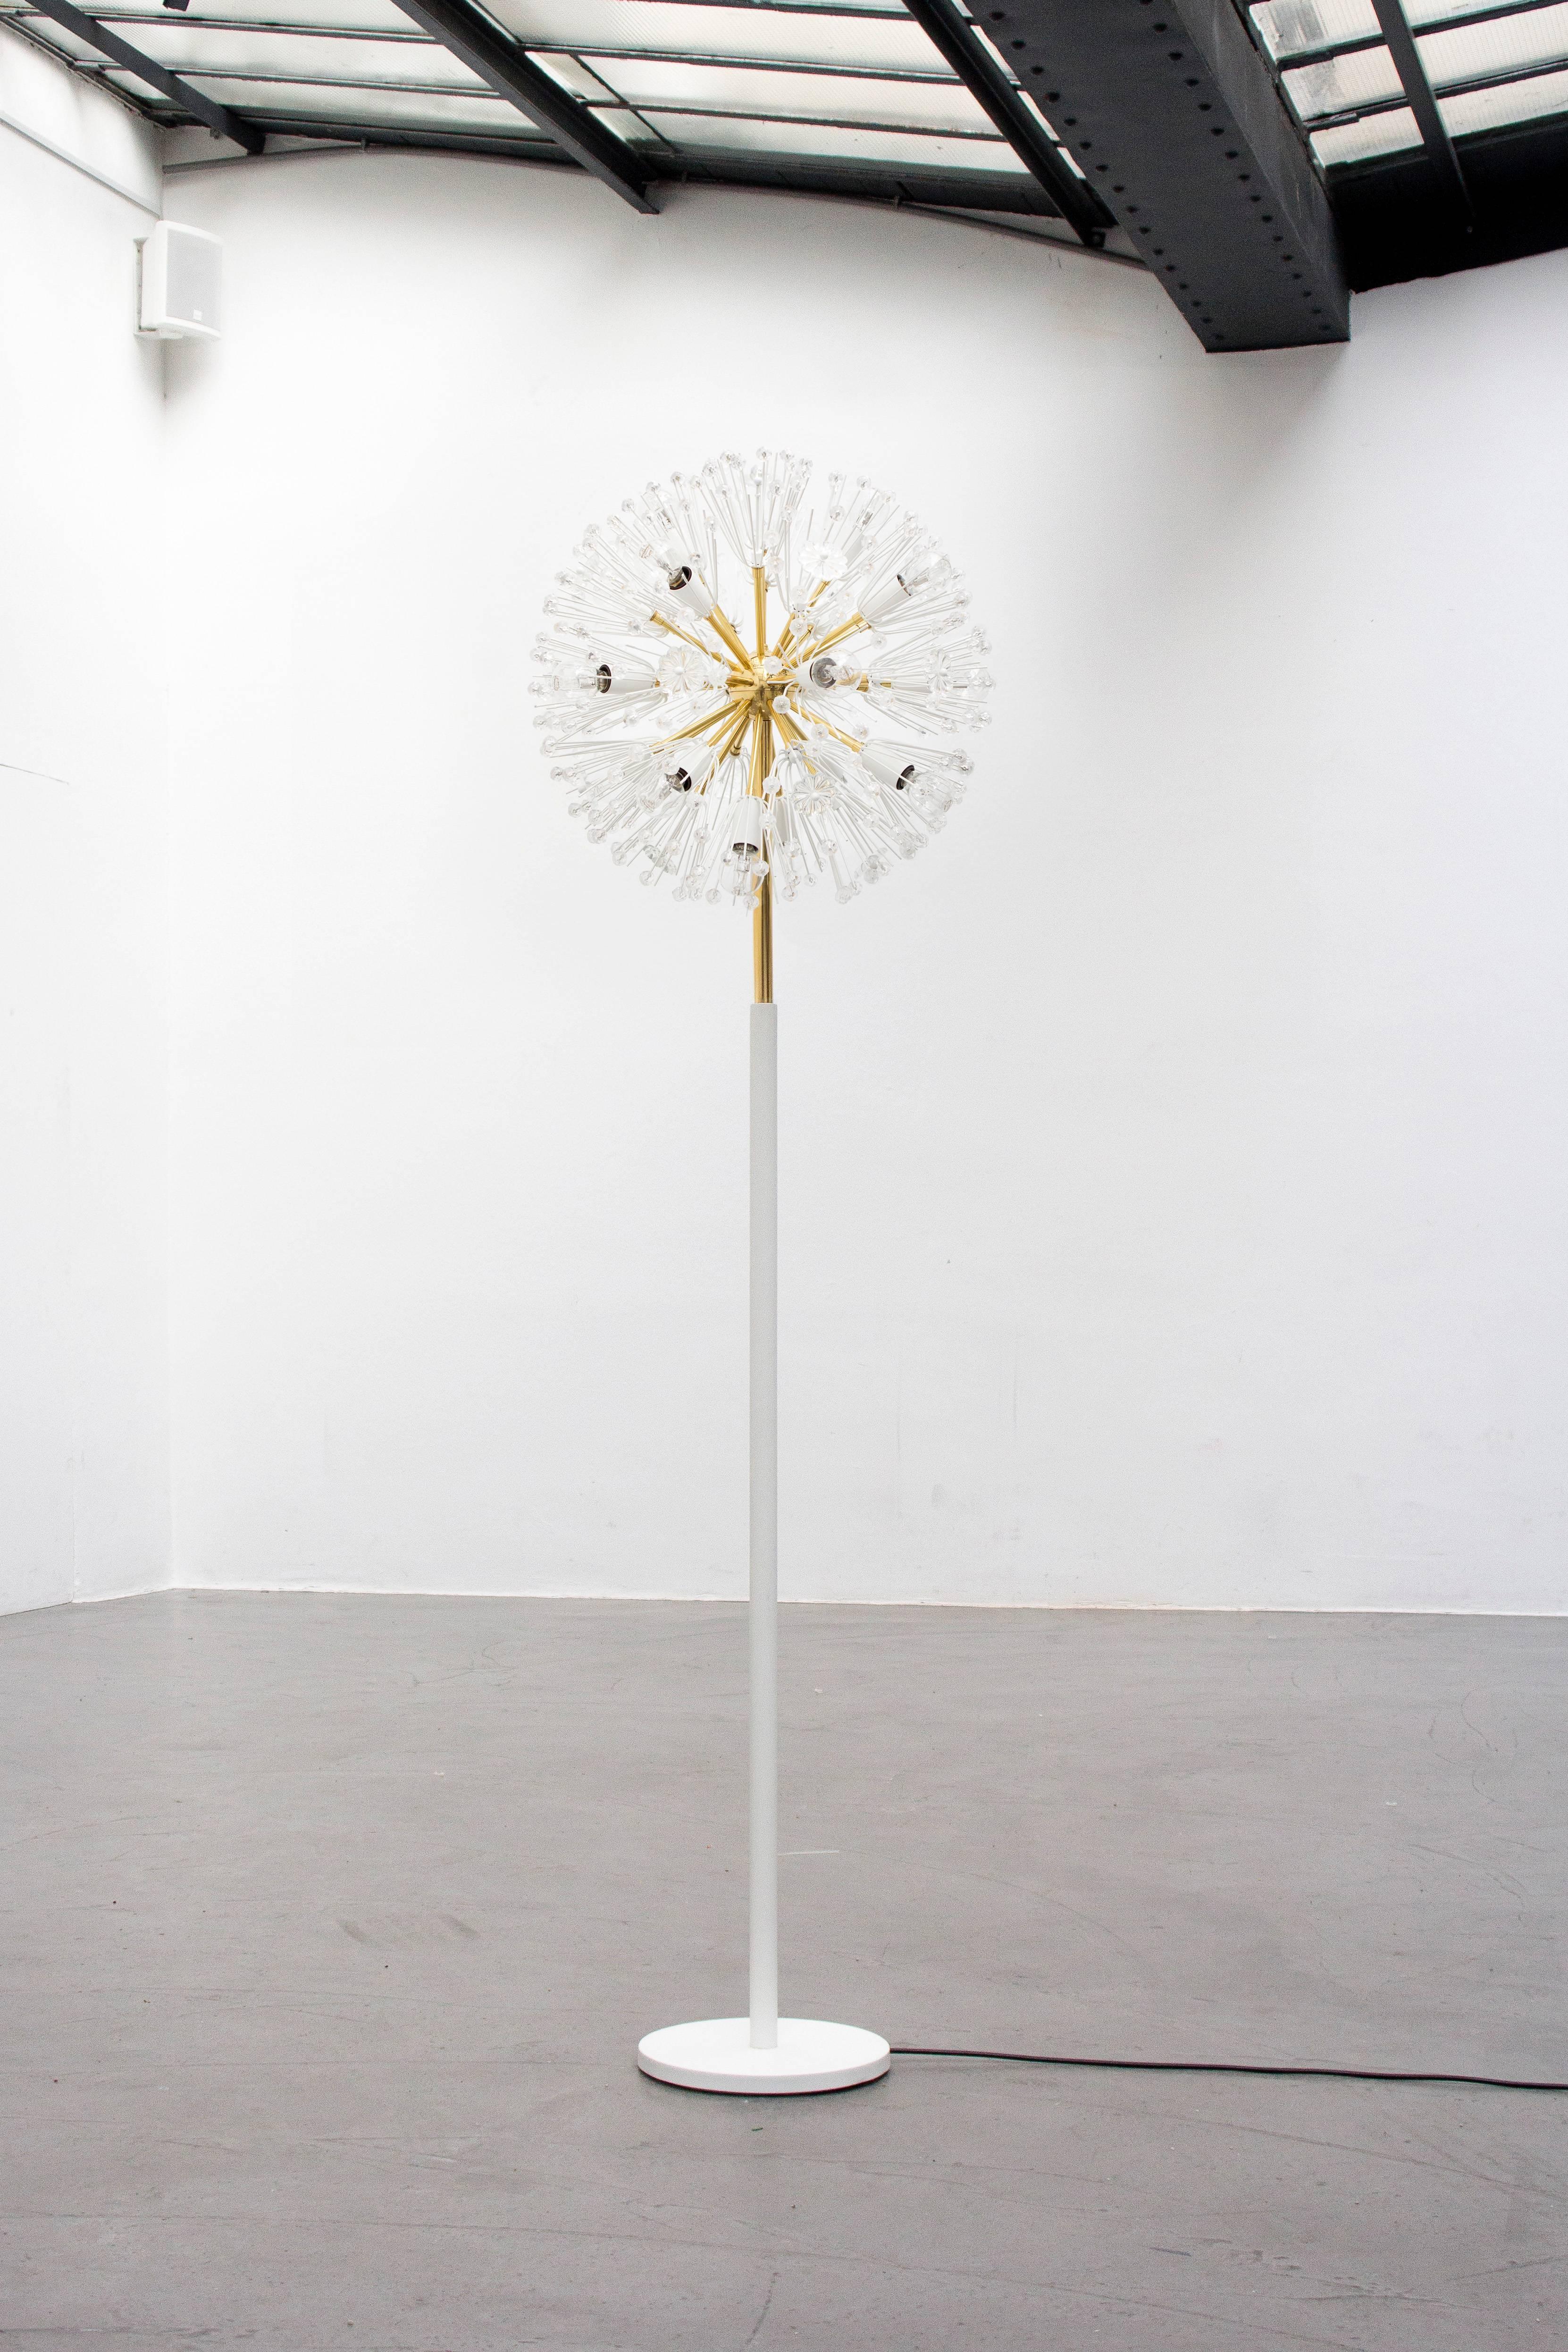 A beautiful and rare Austrian Mid-Century blowball Sputnik floor lamp from the 1950s, designed by Emil Stejnar, executed by Rupert Nikoll in Vienna. Made of brass, fully covered with Austrian crystal balls and glass flowers. This floor lamp has 17